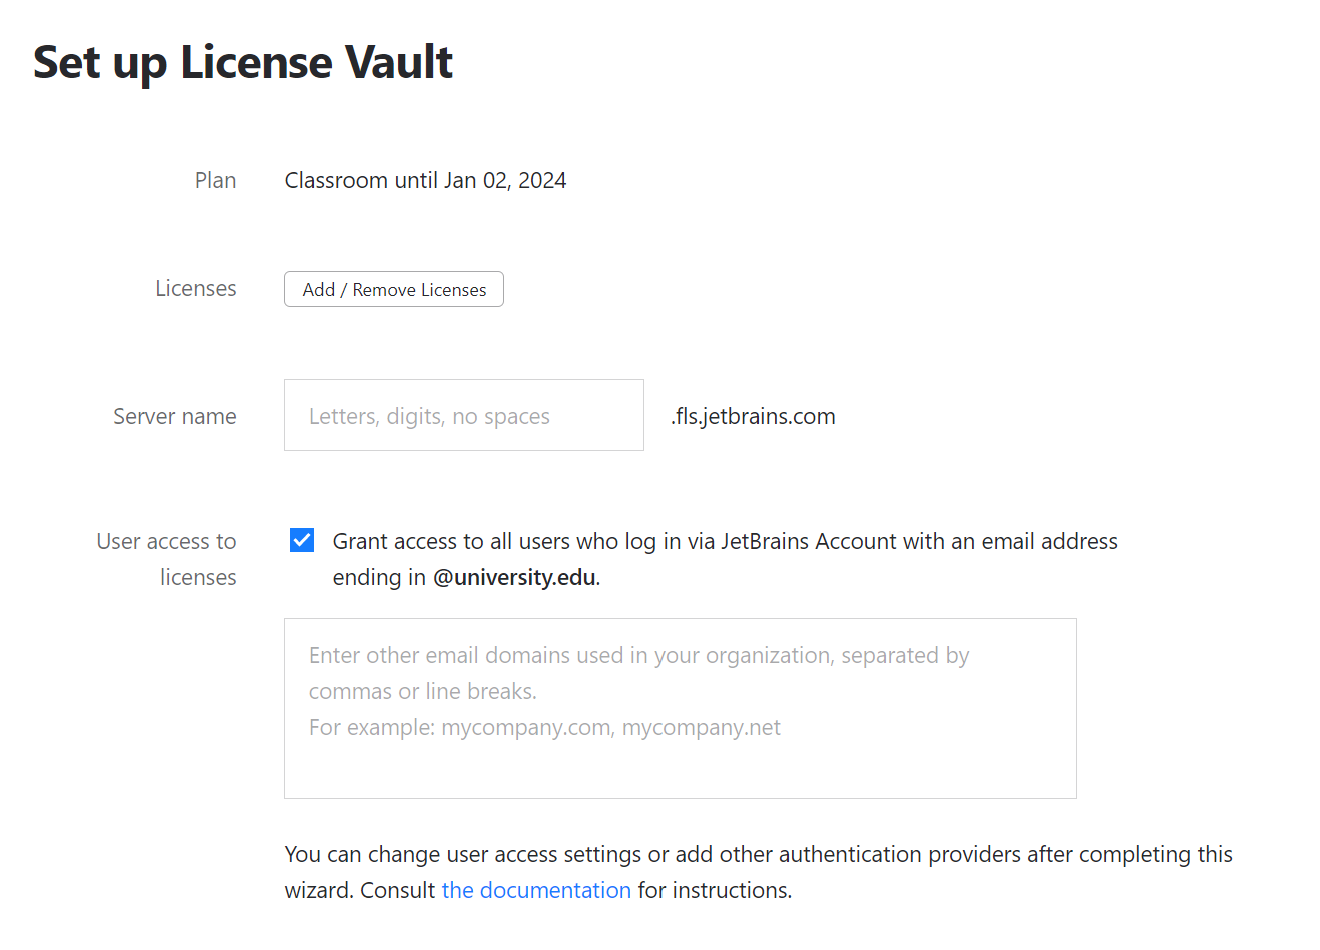 The License Vault setup screen for the owners of                  free educational (classroom) licenses